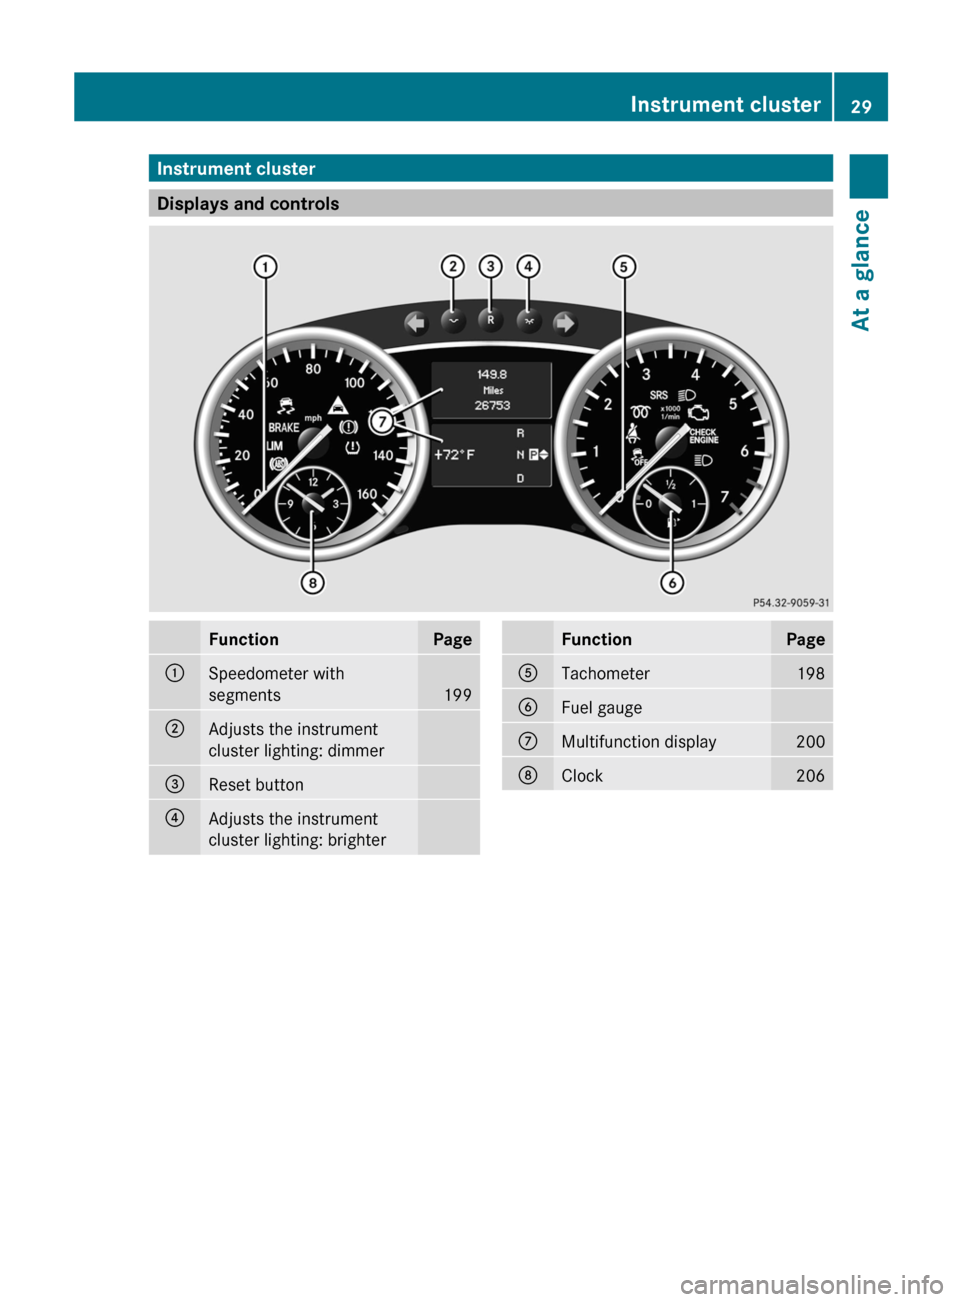 MERCEDES-BENZ R-Class 2012 W251 Owners Manual Instrument cluster
Displays and controls
FunctionPage:Speedometer with
segments
199
;Adjusts the instrument
cluster lighting: dimmer=Reset button?Adjusts the instrument
cluster lighting: brighterFunct